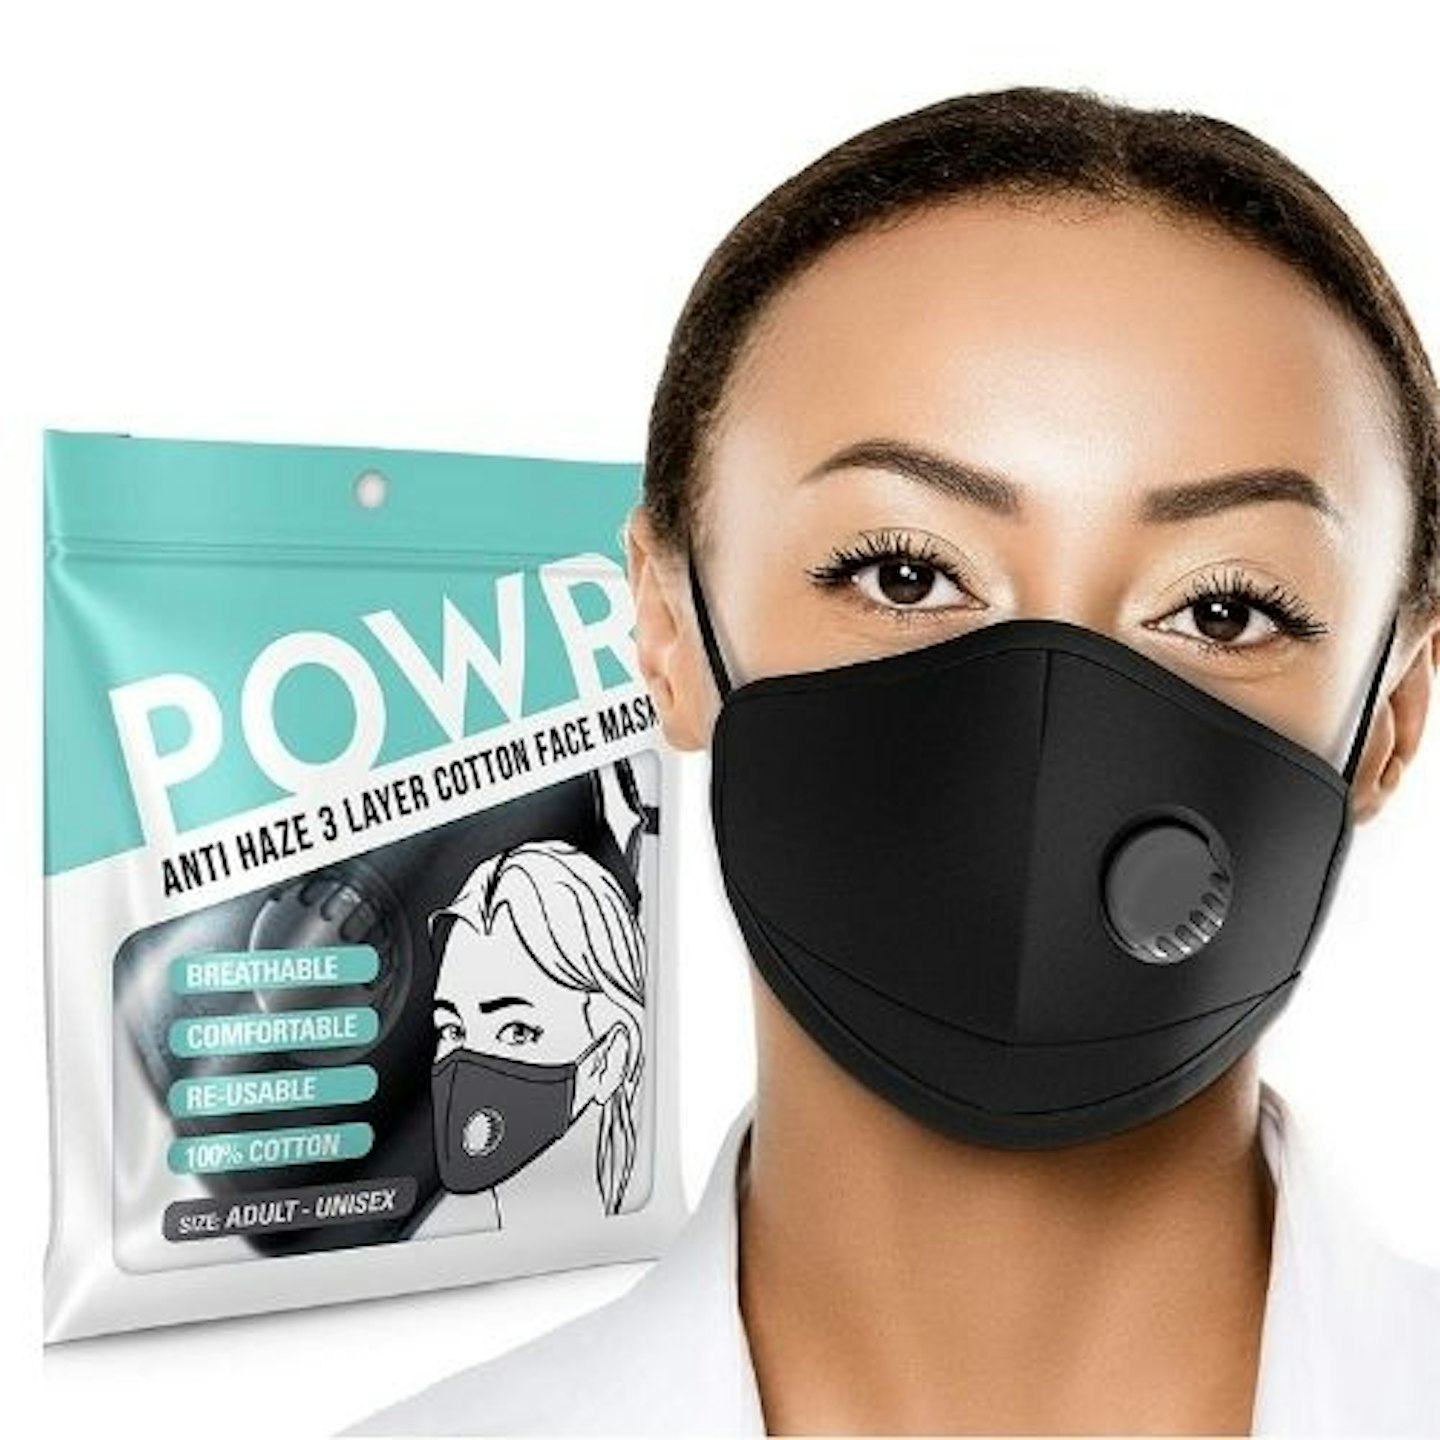 POWR Store Face Mask